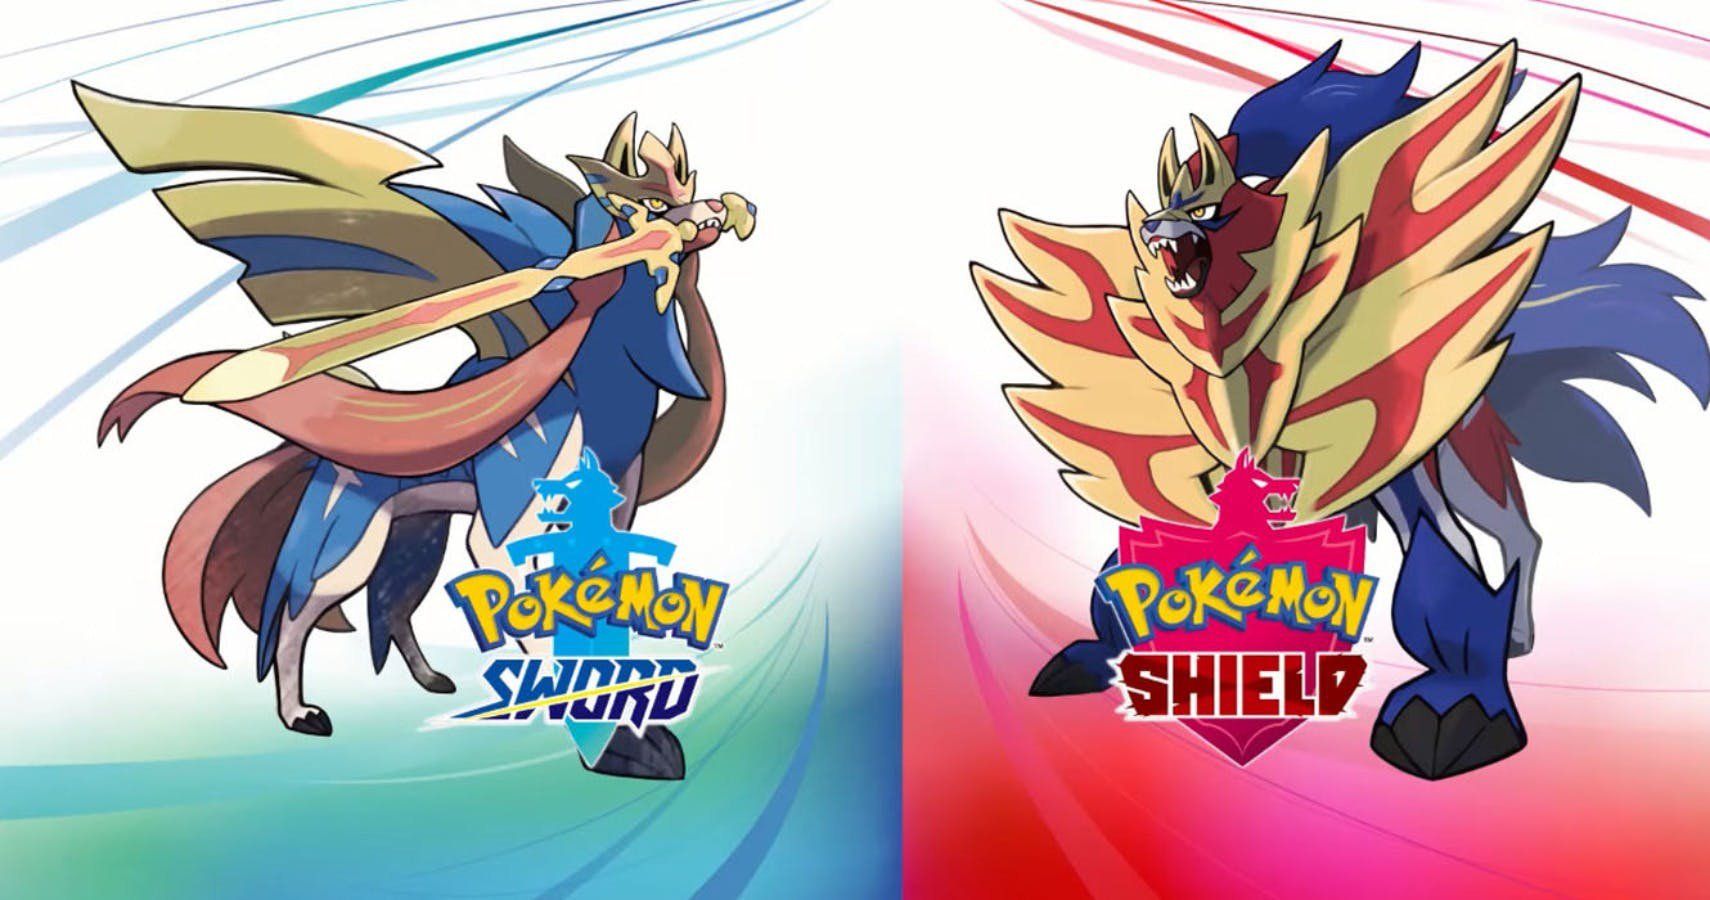 Pokemon Sword and Sheild Subway System Article 8 21 19